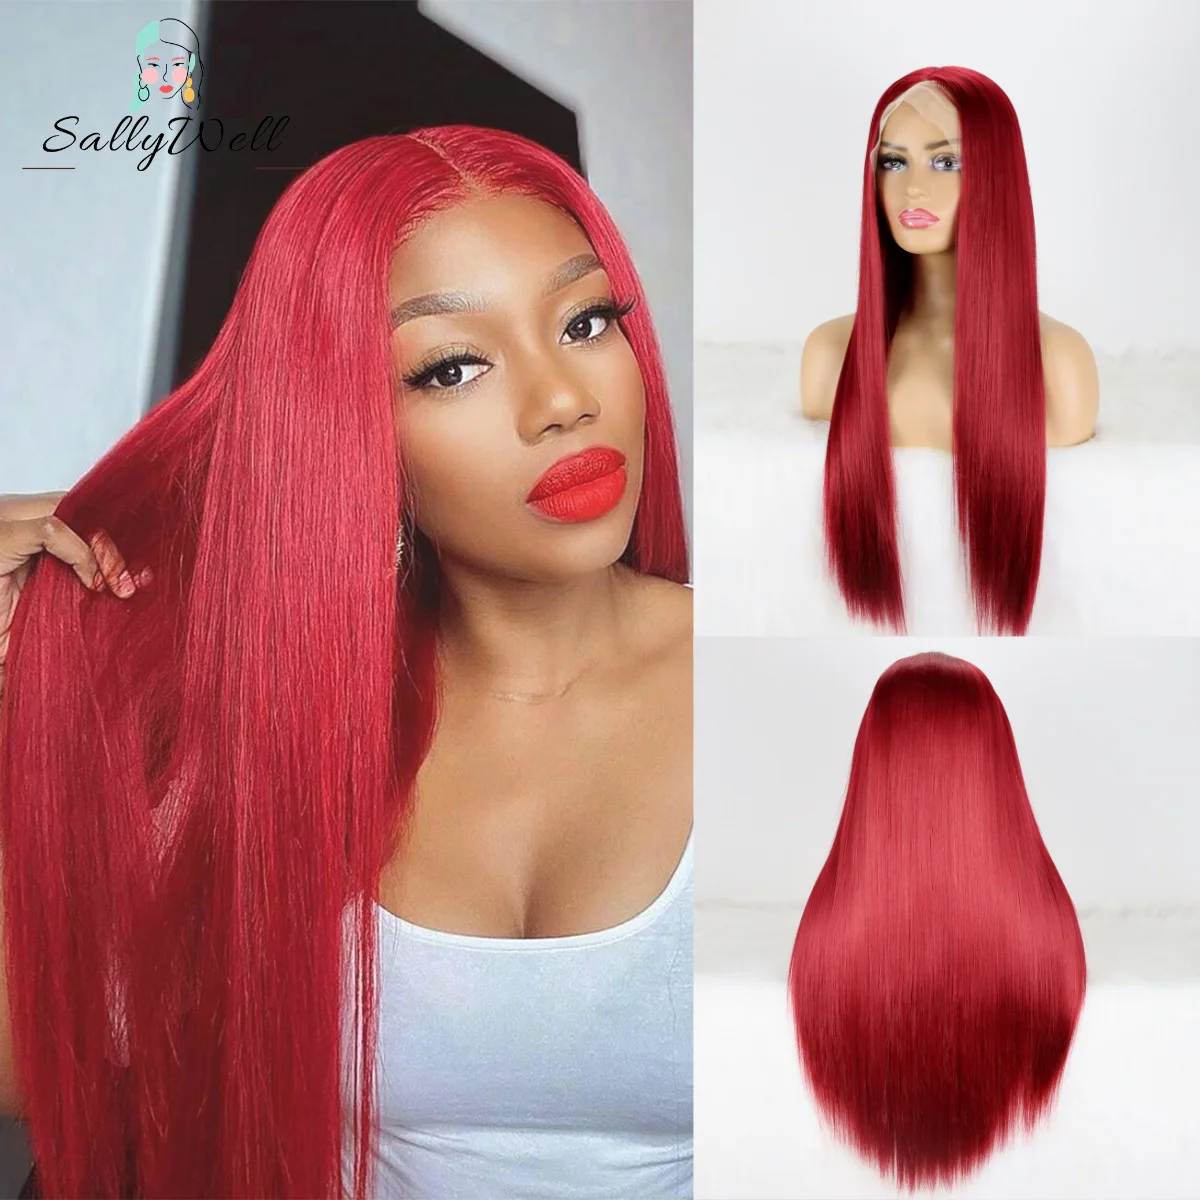 Synthetic Red Wigs For Women Heat Resistant Synthetic Lace Front Wigs Fashion Long Straight for Party Cosplay 18-24 Inch